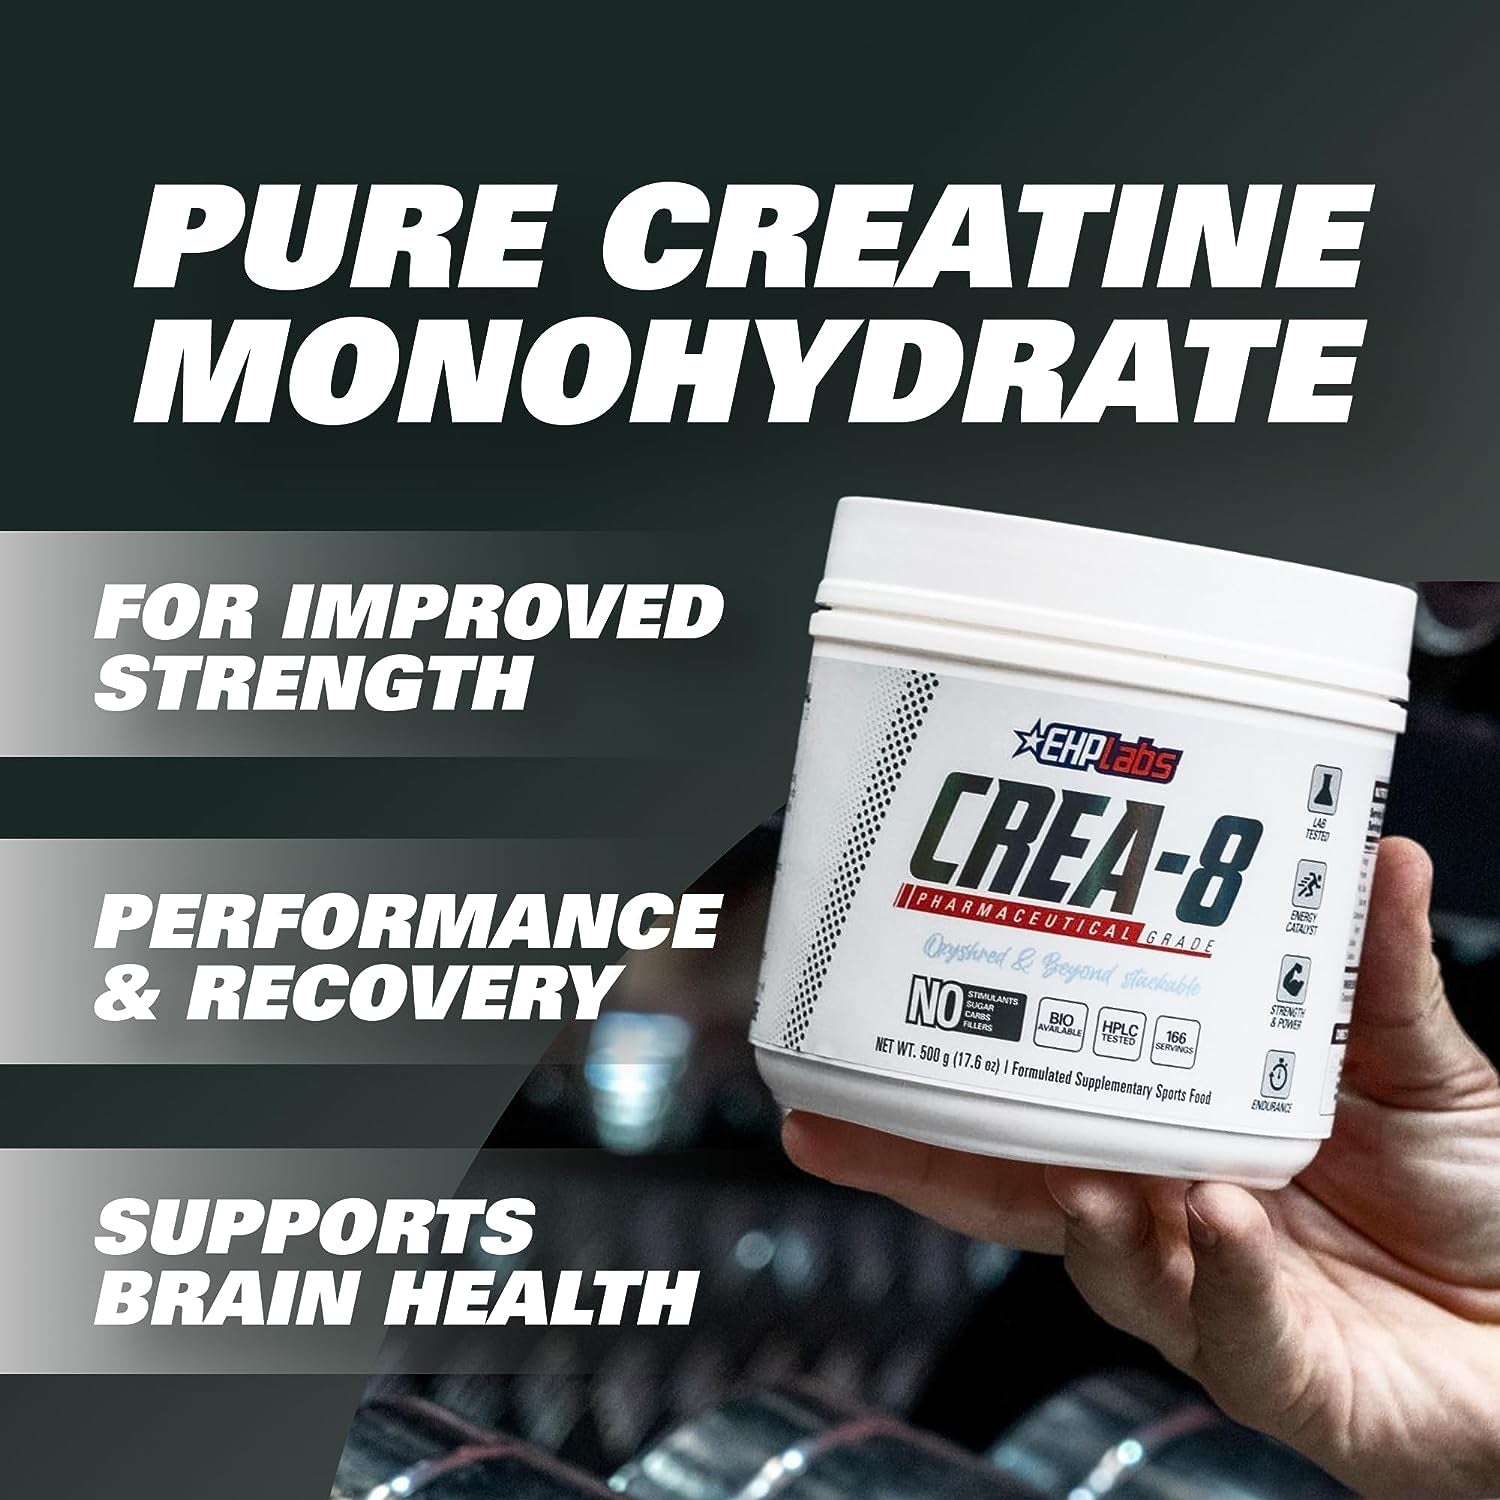 Ehplabs CREA-8 Creatine Monohydrate Powder - Creatine Powder for Building Lean Muscle Mass, Improves Strength & Power, Supports Brain Health - 100 Servings (500G)